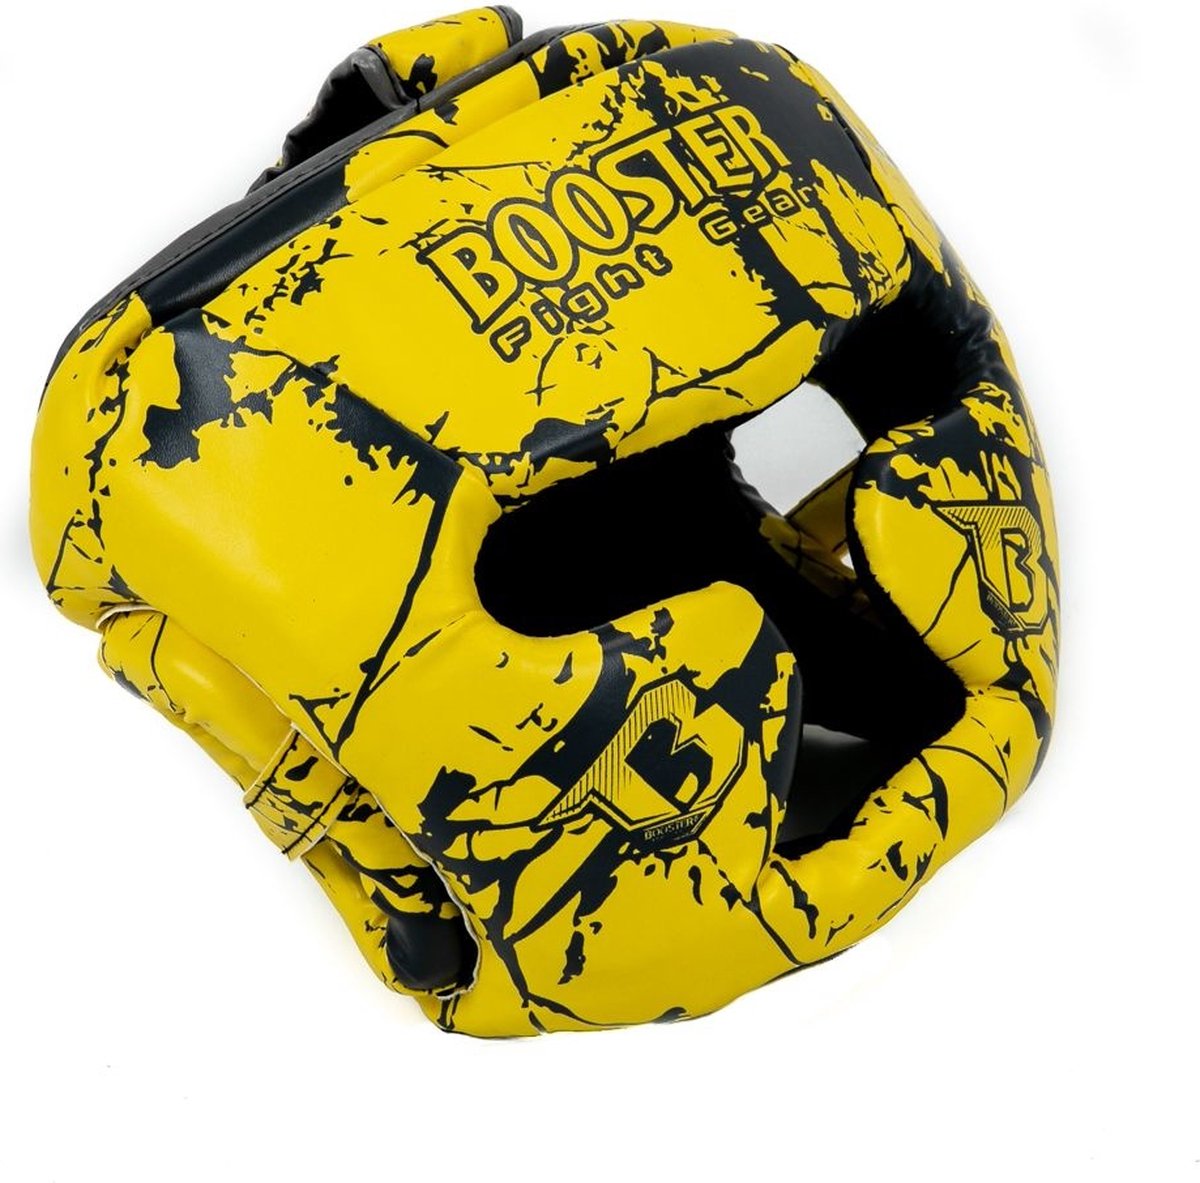 Booster Fightgear - HGL B 2 Youth Marble Yellow